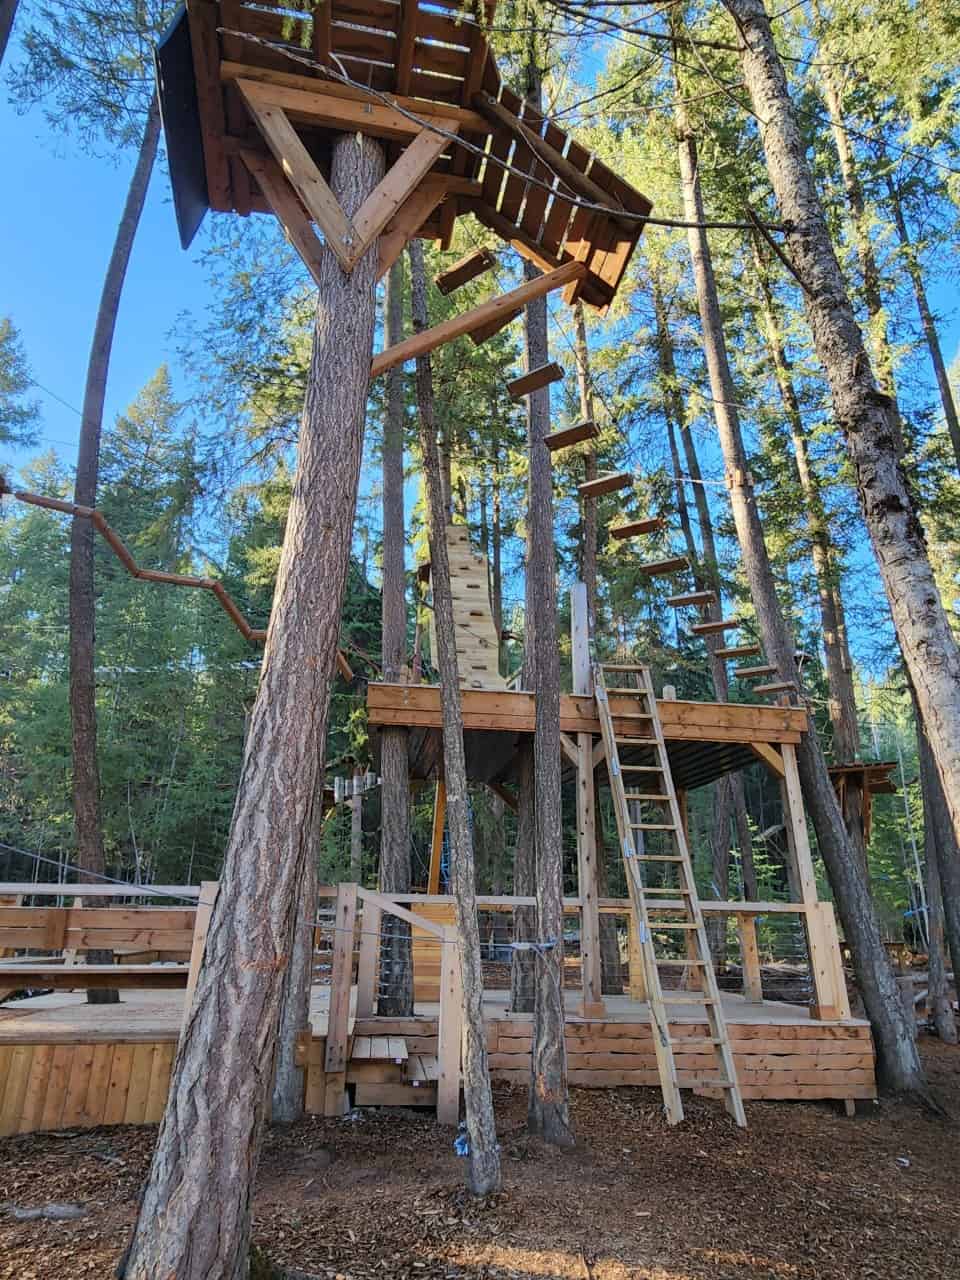 Amazing Treetop Course!  - Test your abilities on this climbing course high up in the tree!